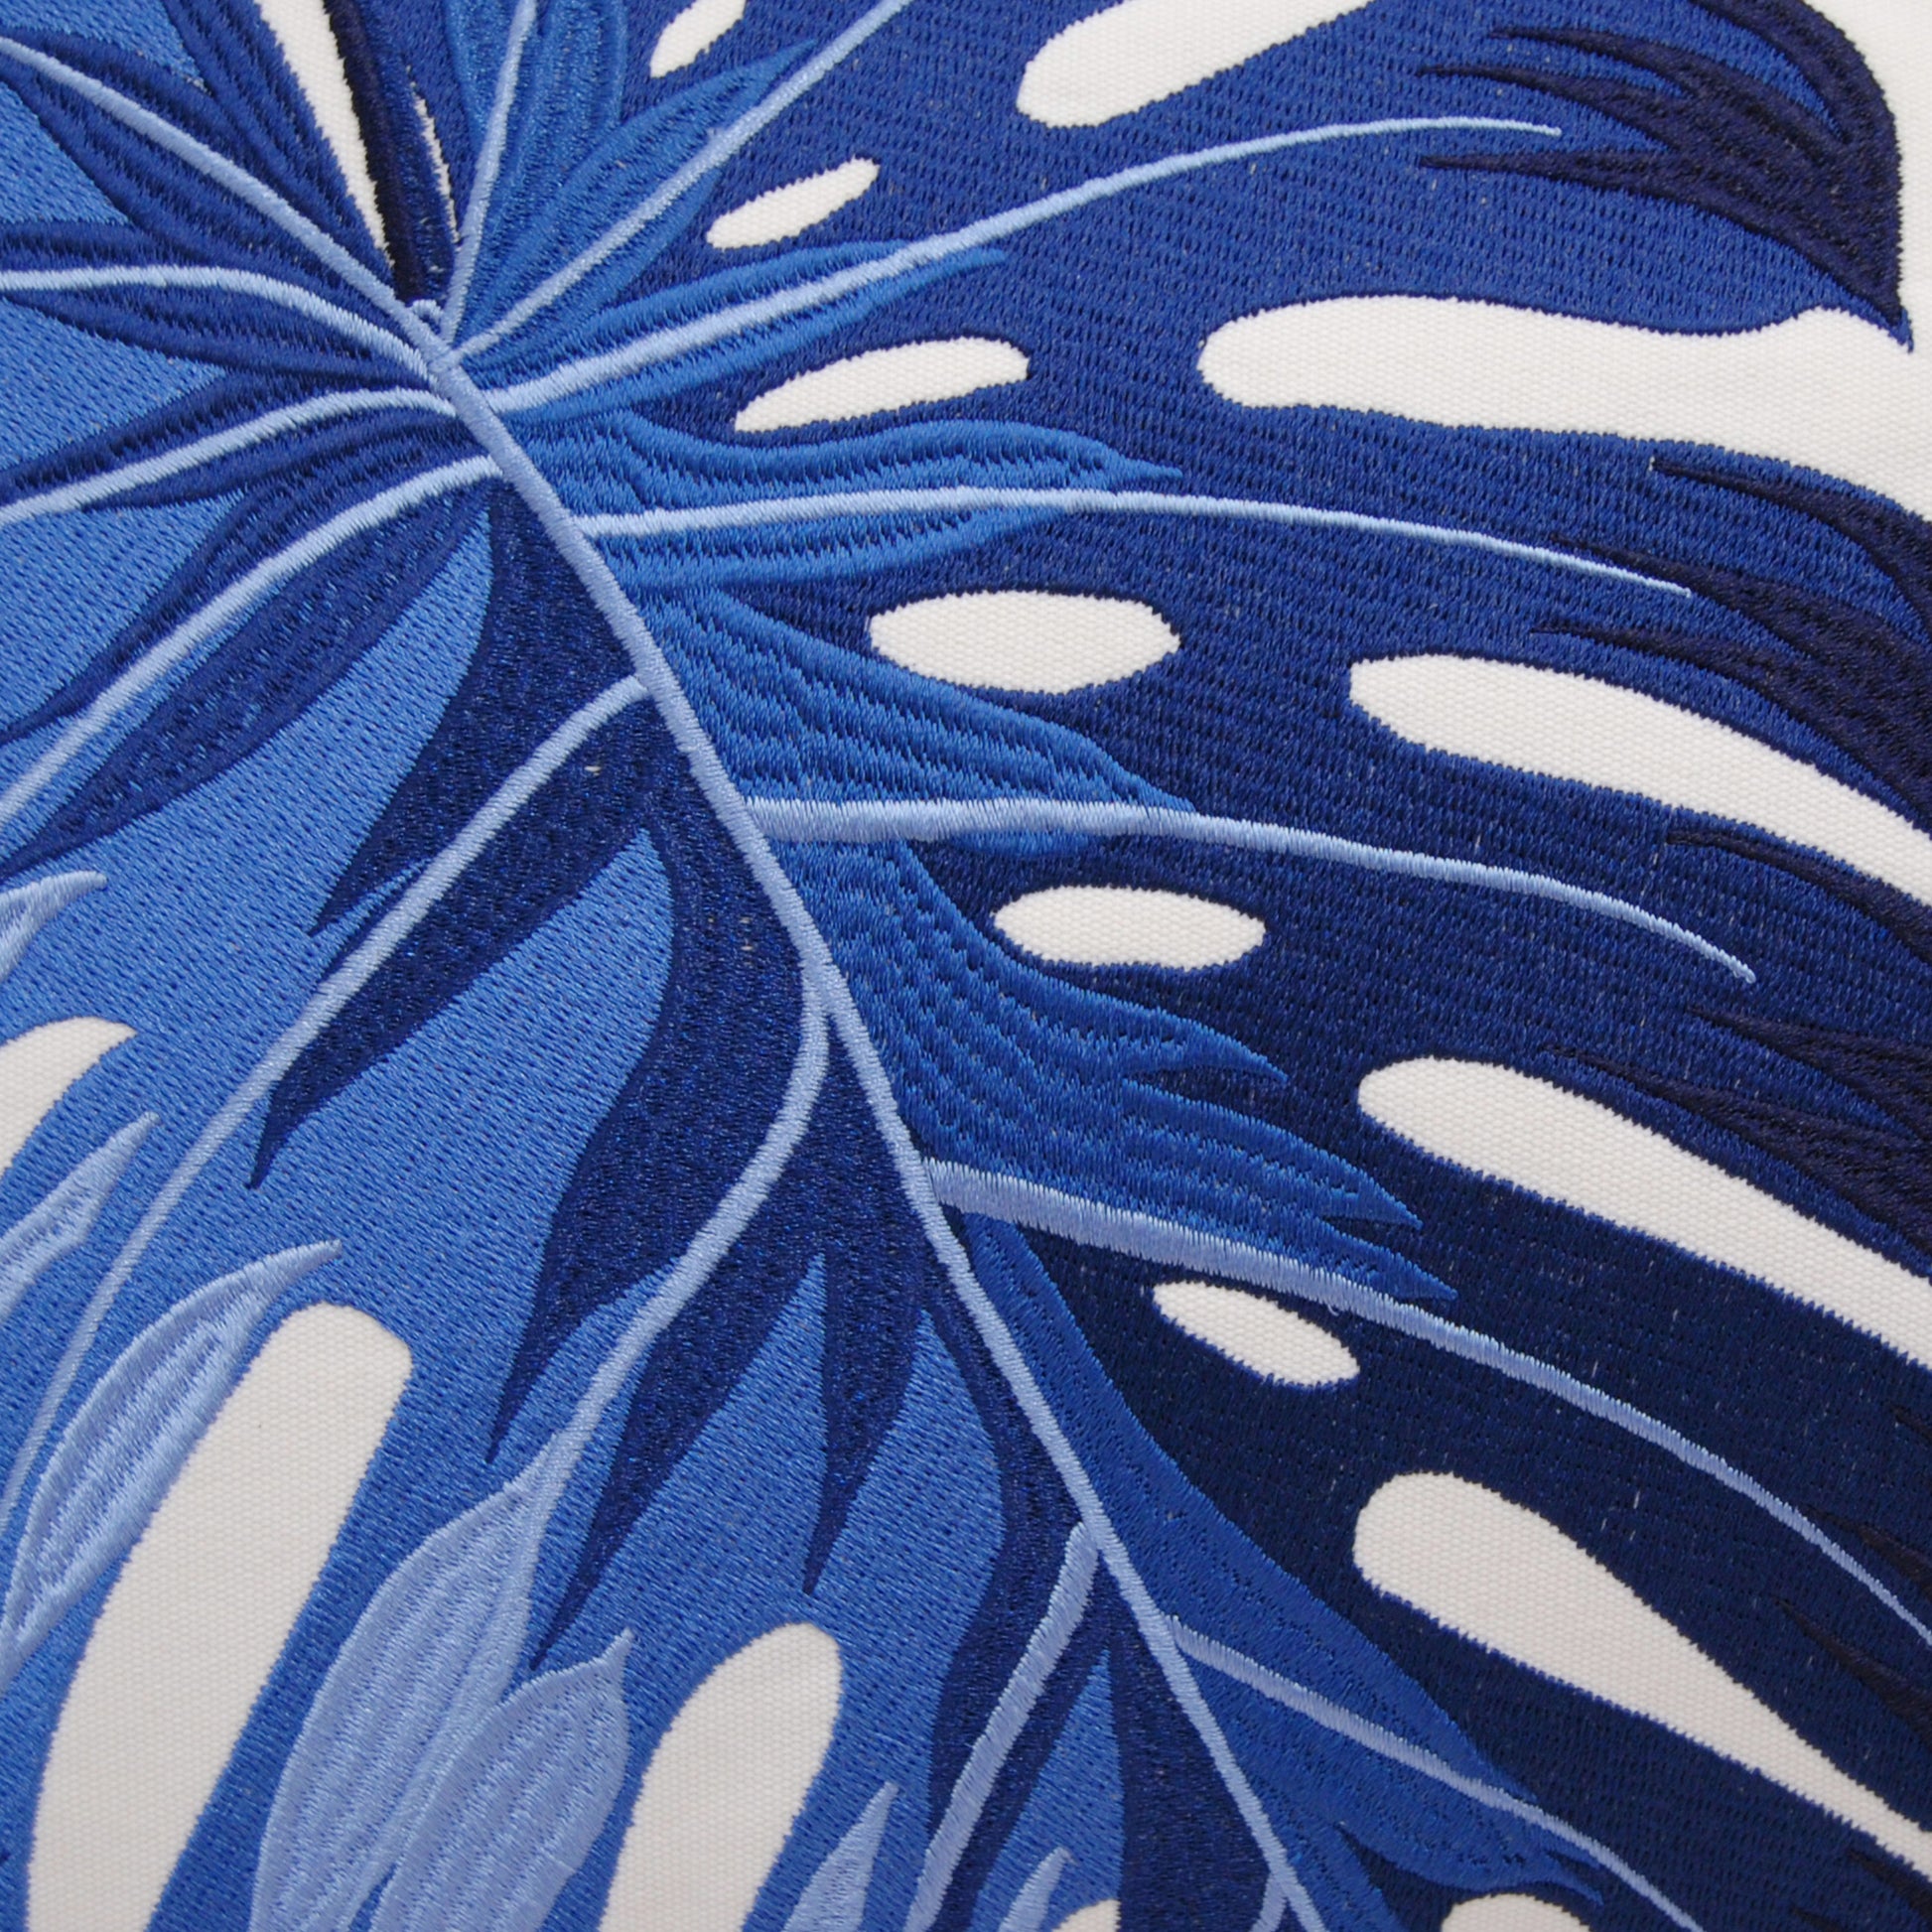 Detail shot of the Blue Monstera Pillow embroidery.